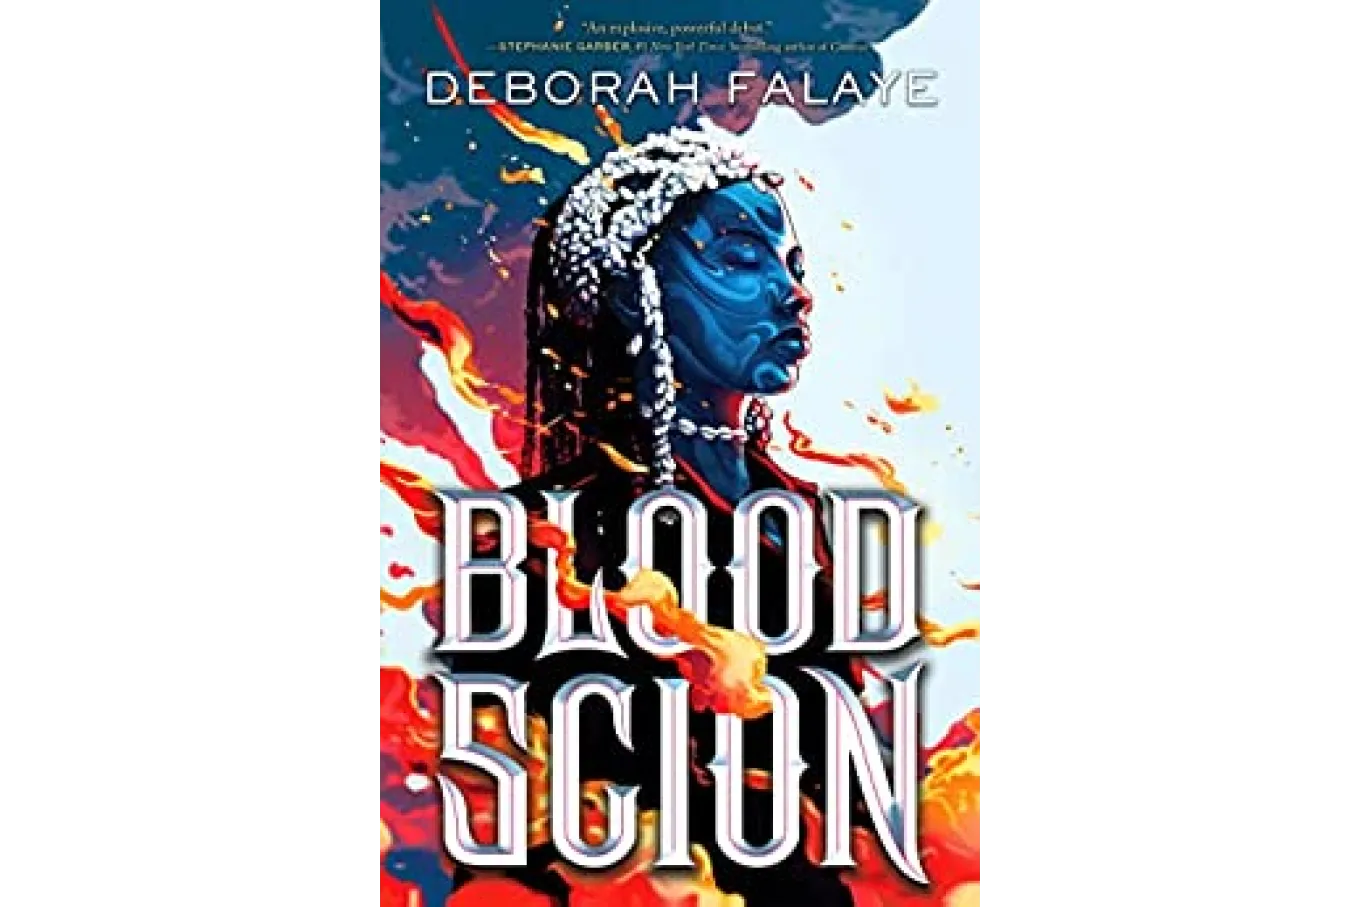 Cover of Blood Scion